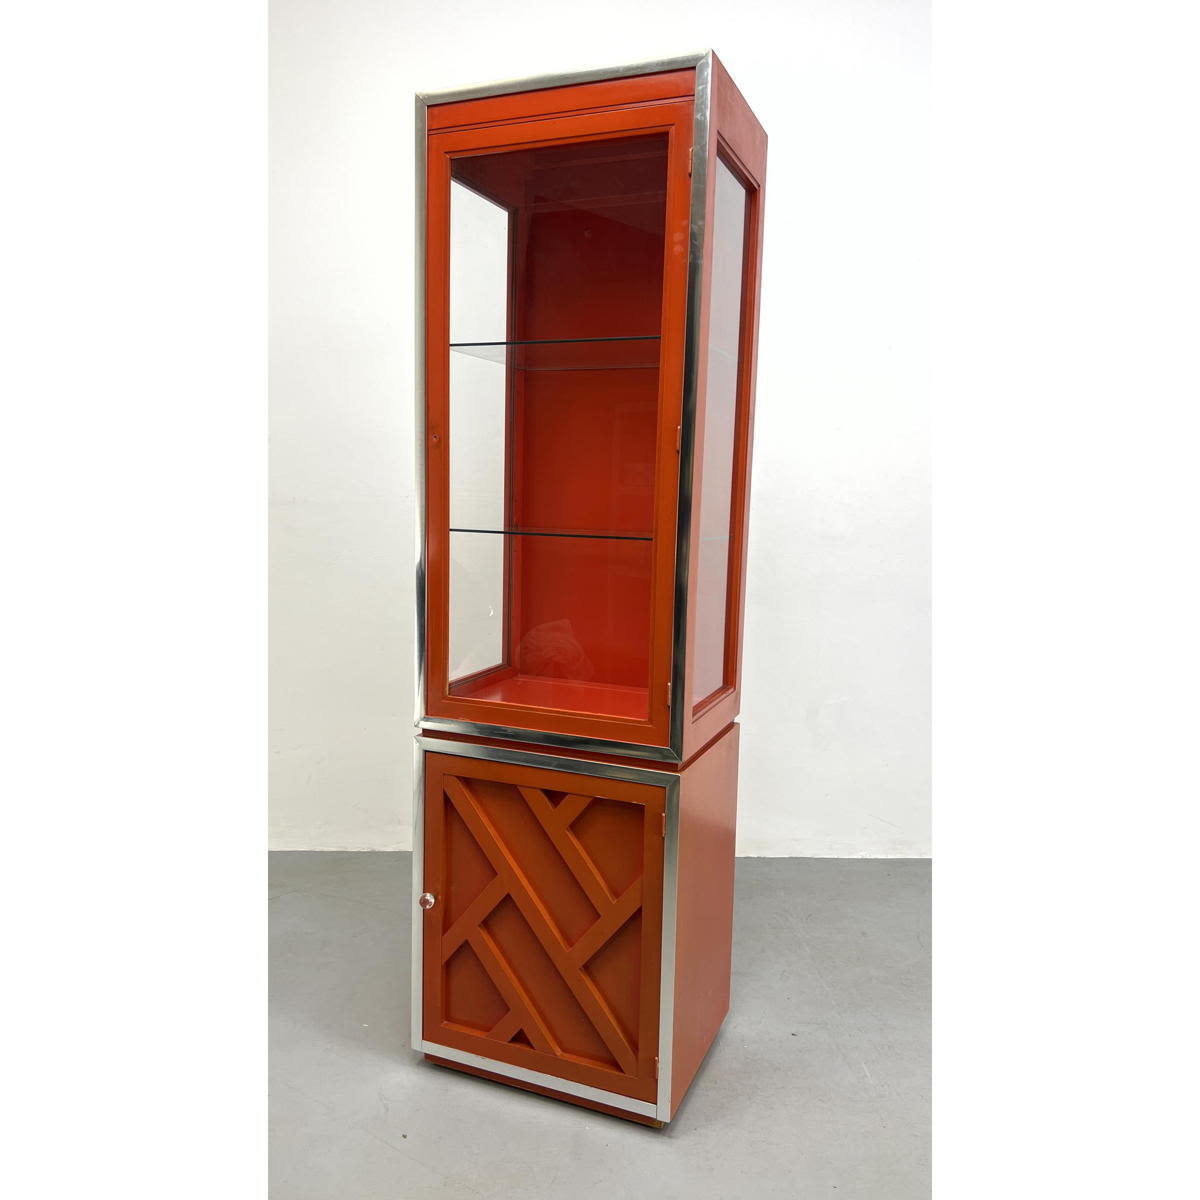 THOMASVILLE Red Lacquered Display Cabinet.